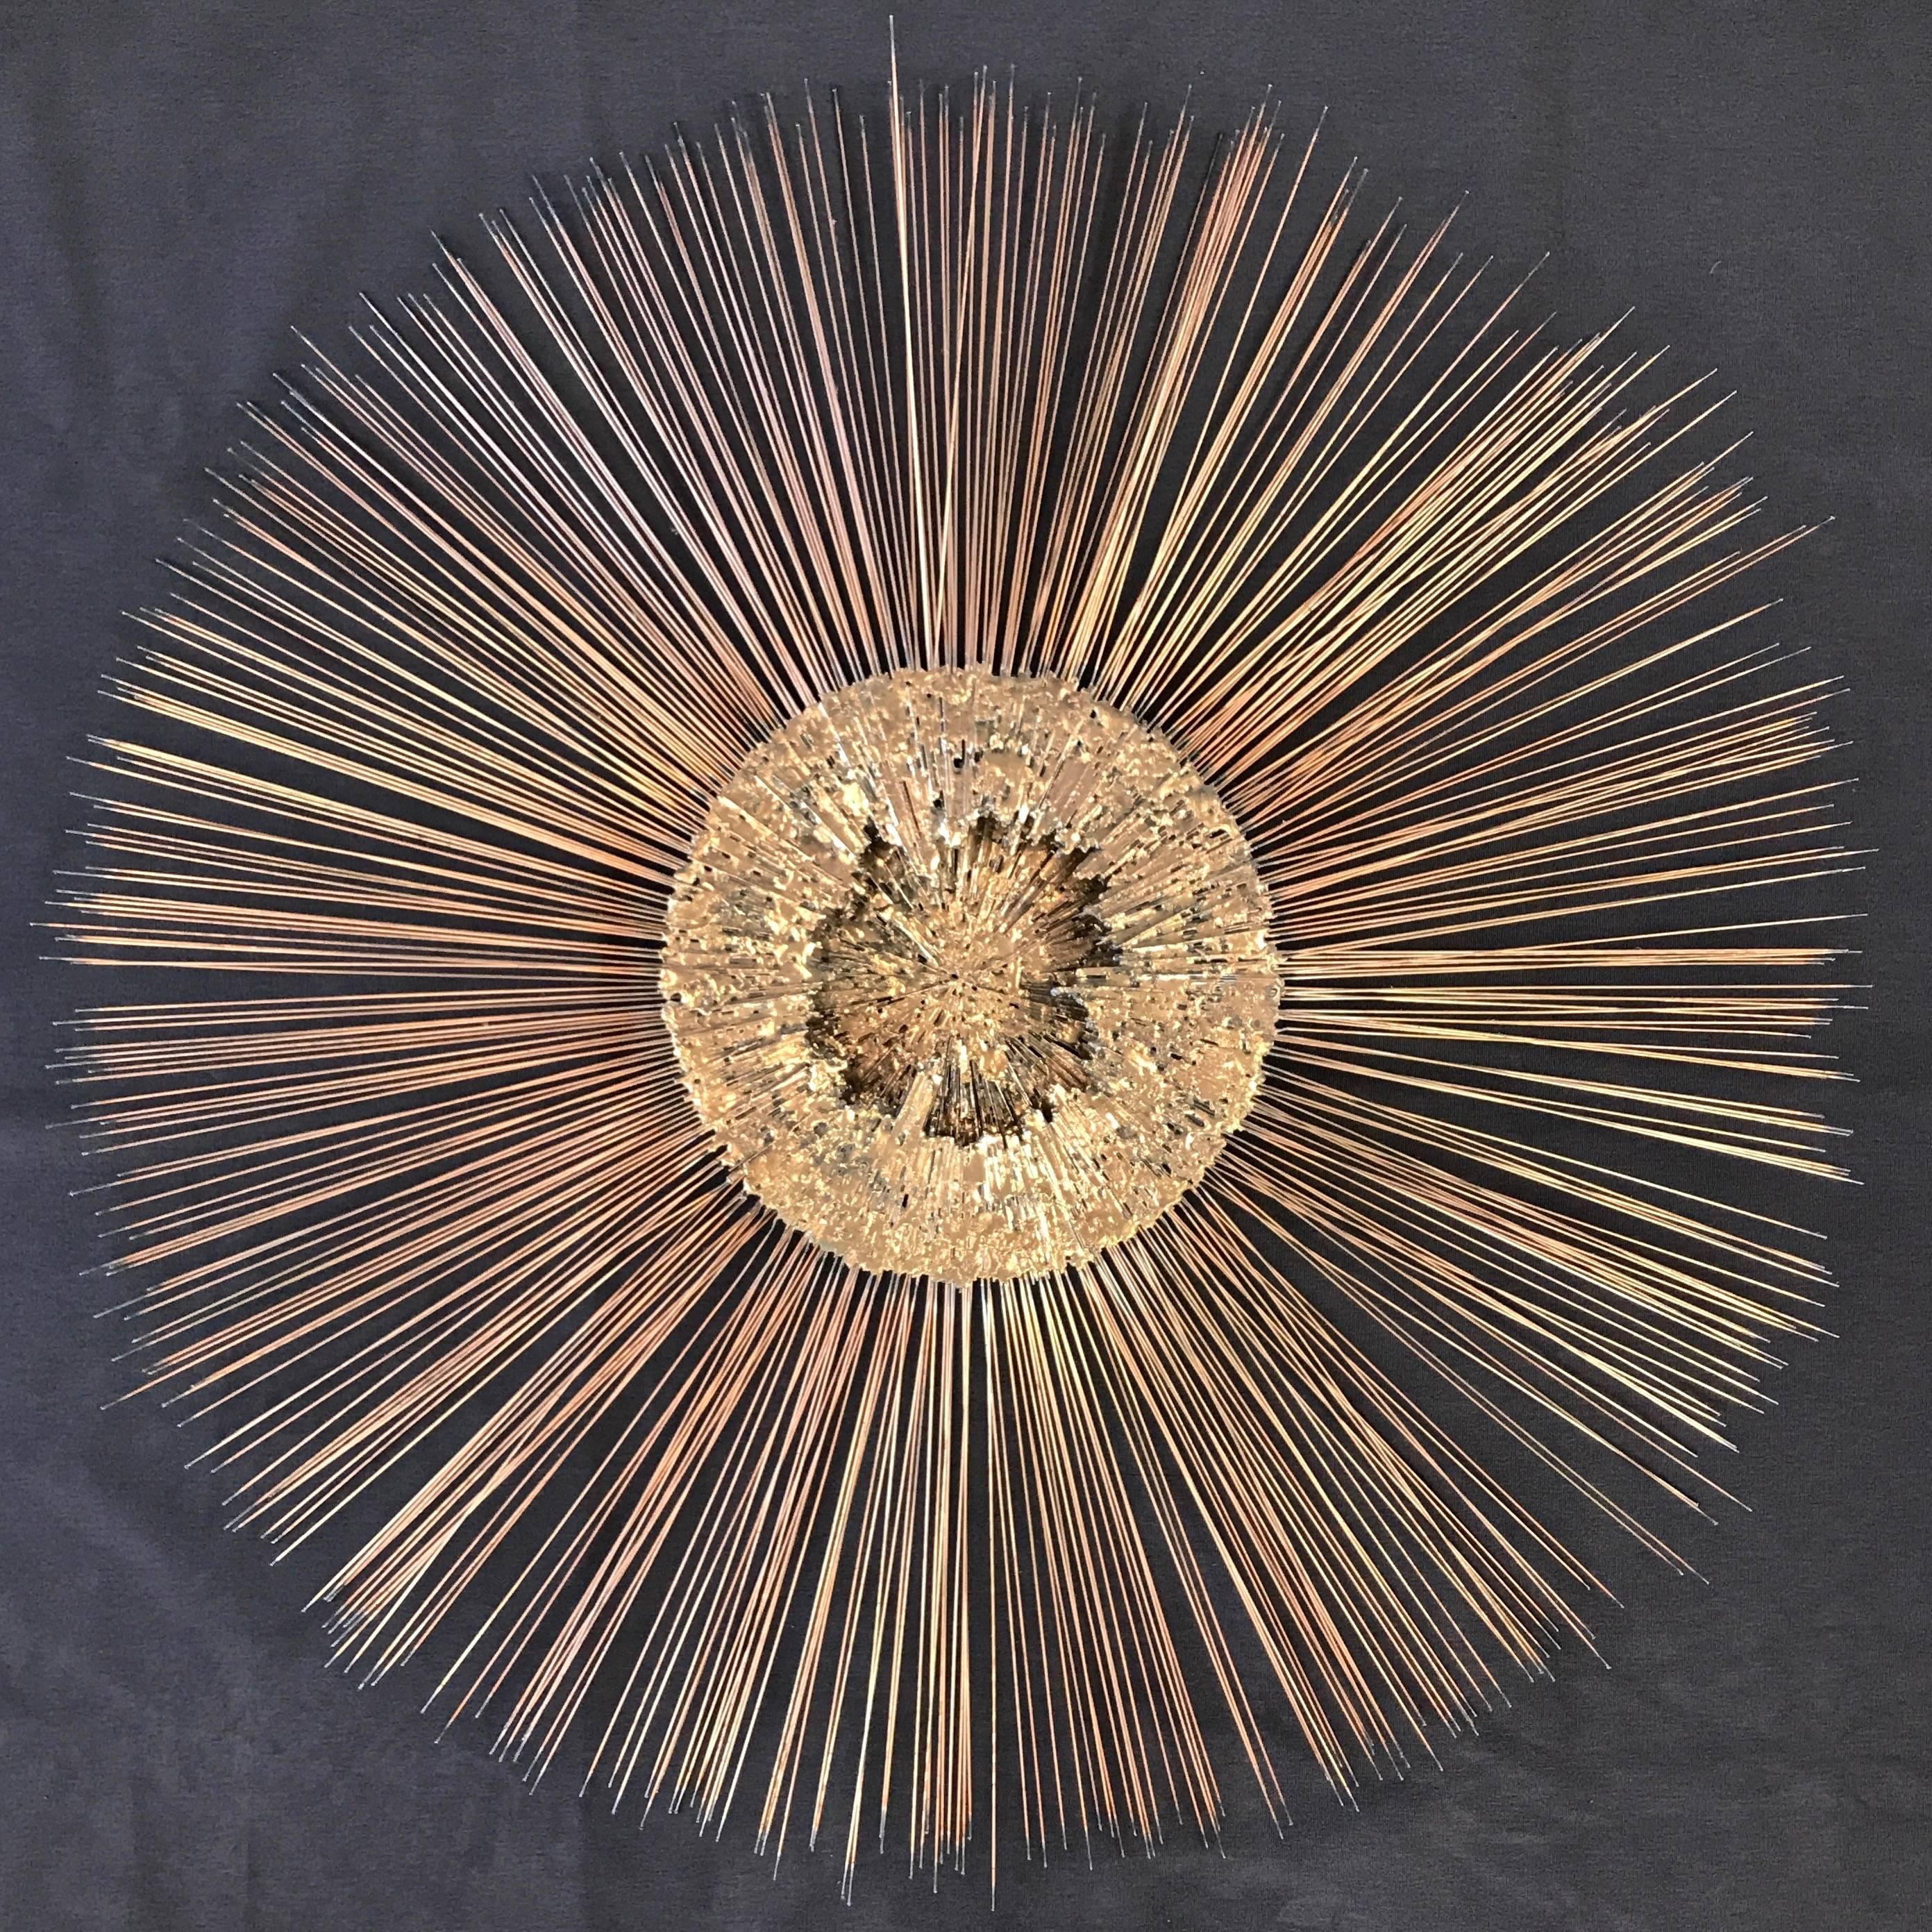 A majestically-sized sunburst or starburst mixed-metal Brutalist wall sculpture by Bruce and William Friedle.

Hundreds of long, thin copper rods with blackened tips resembling burnt matchsticks radiate from a multi-depth, highly textural, molten